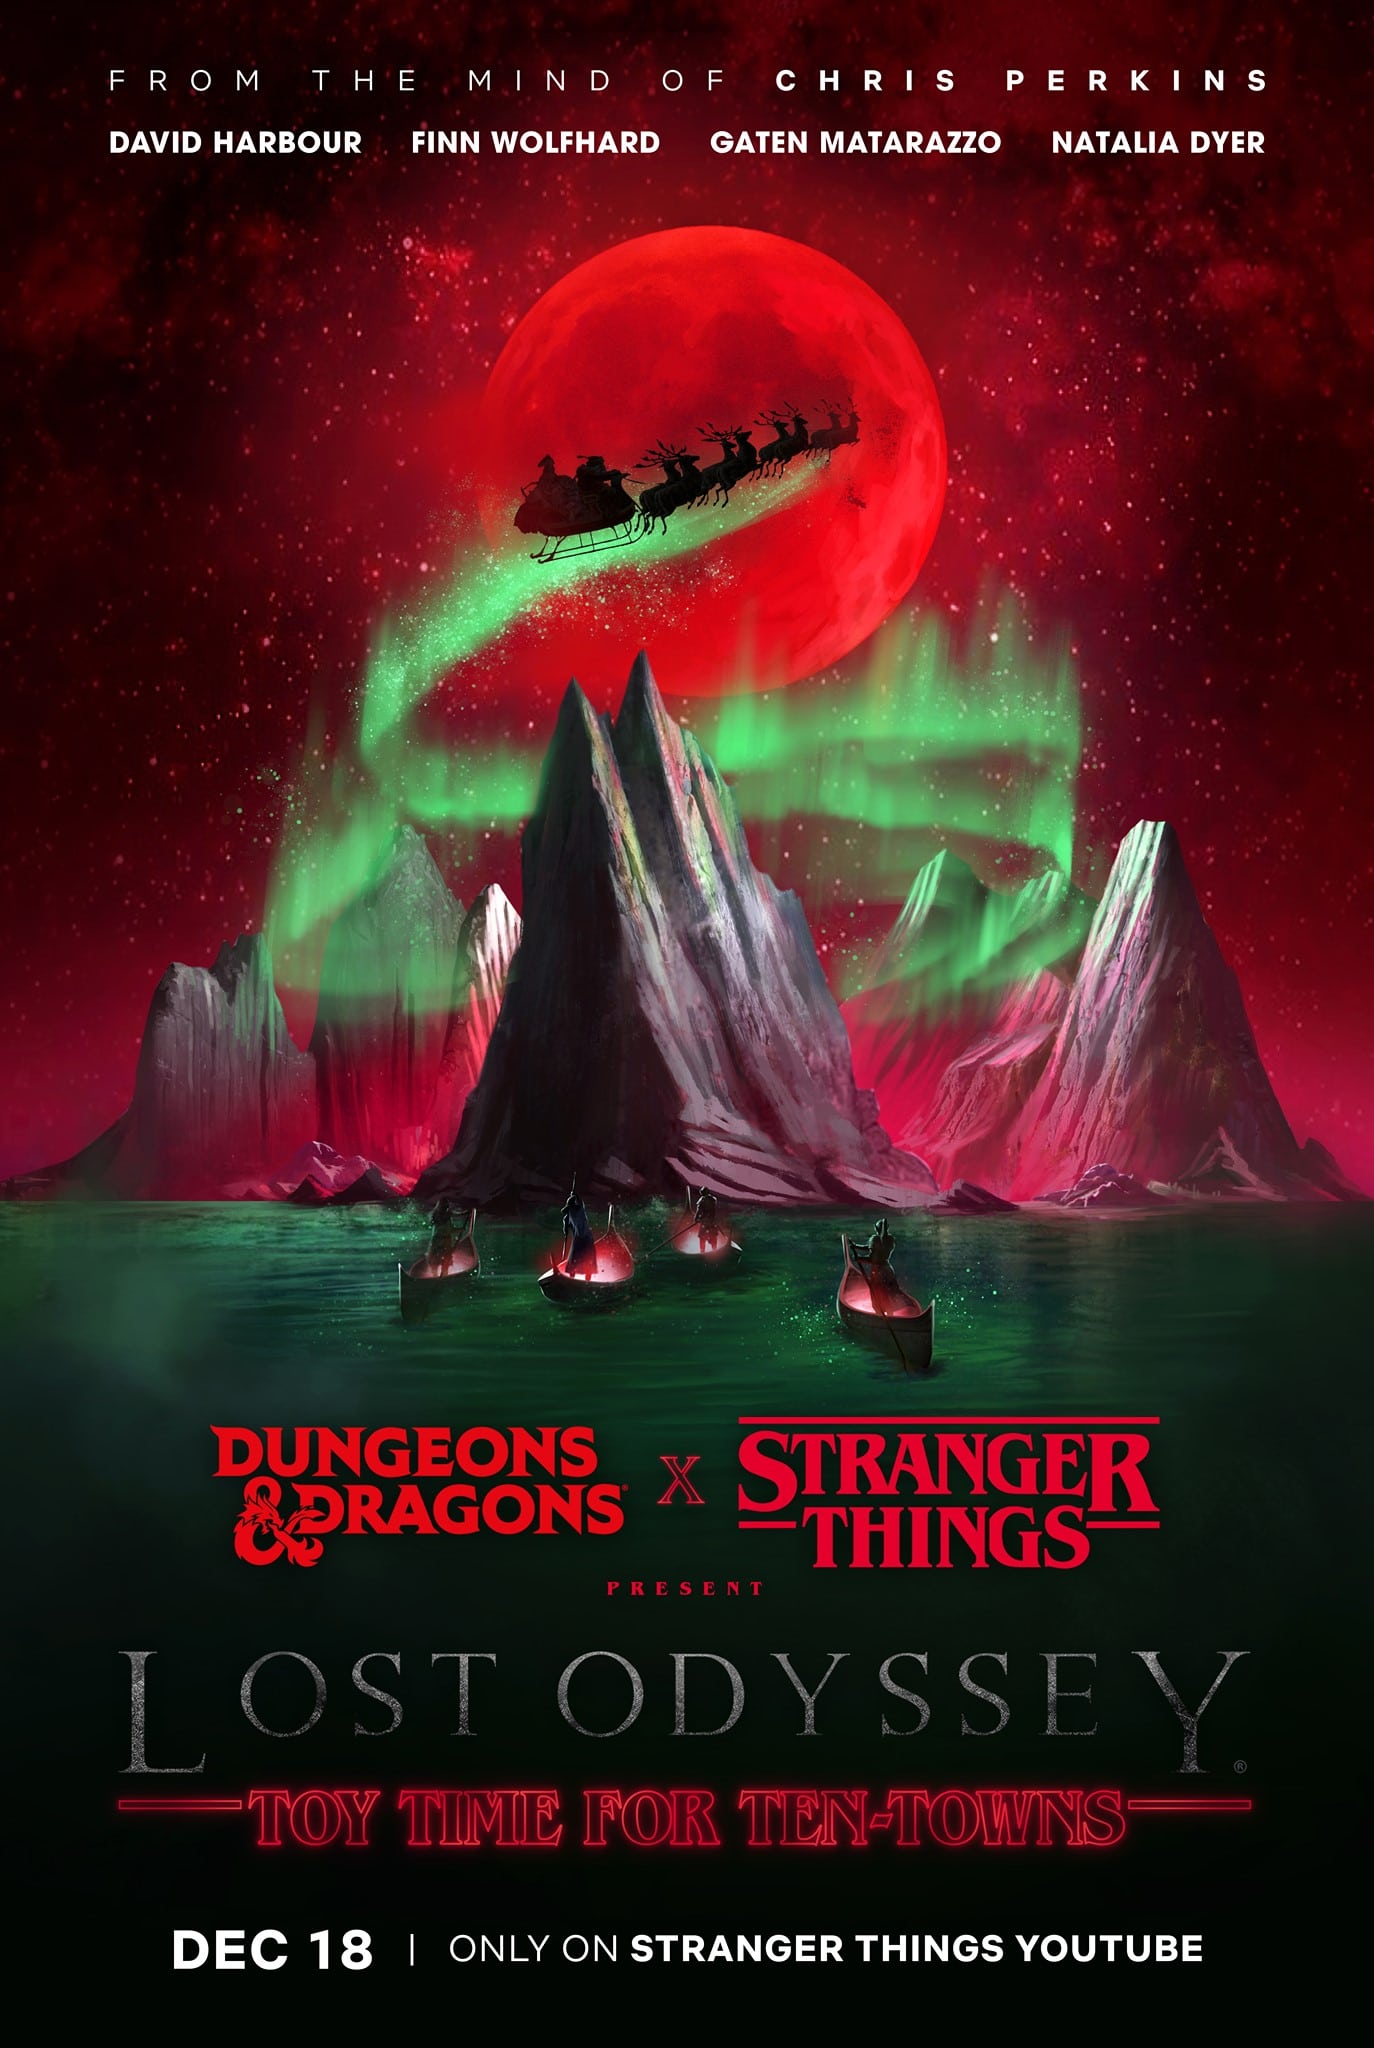 Stranger Things Dungeons and Dragons Dungeons & Dragons Lost Odyssey poster